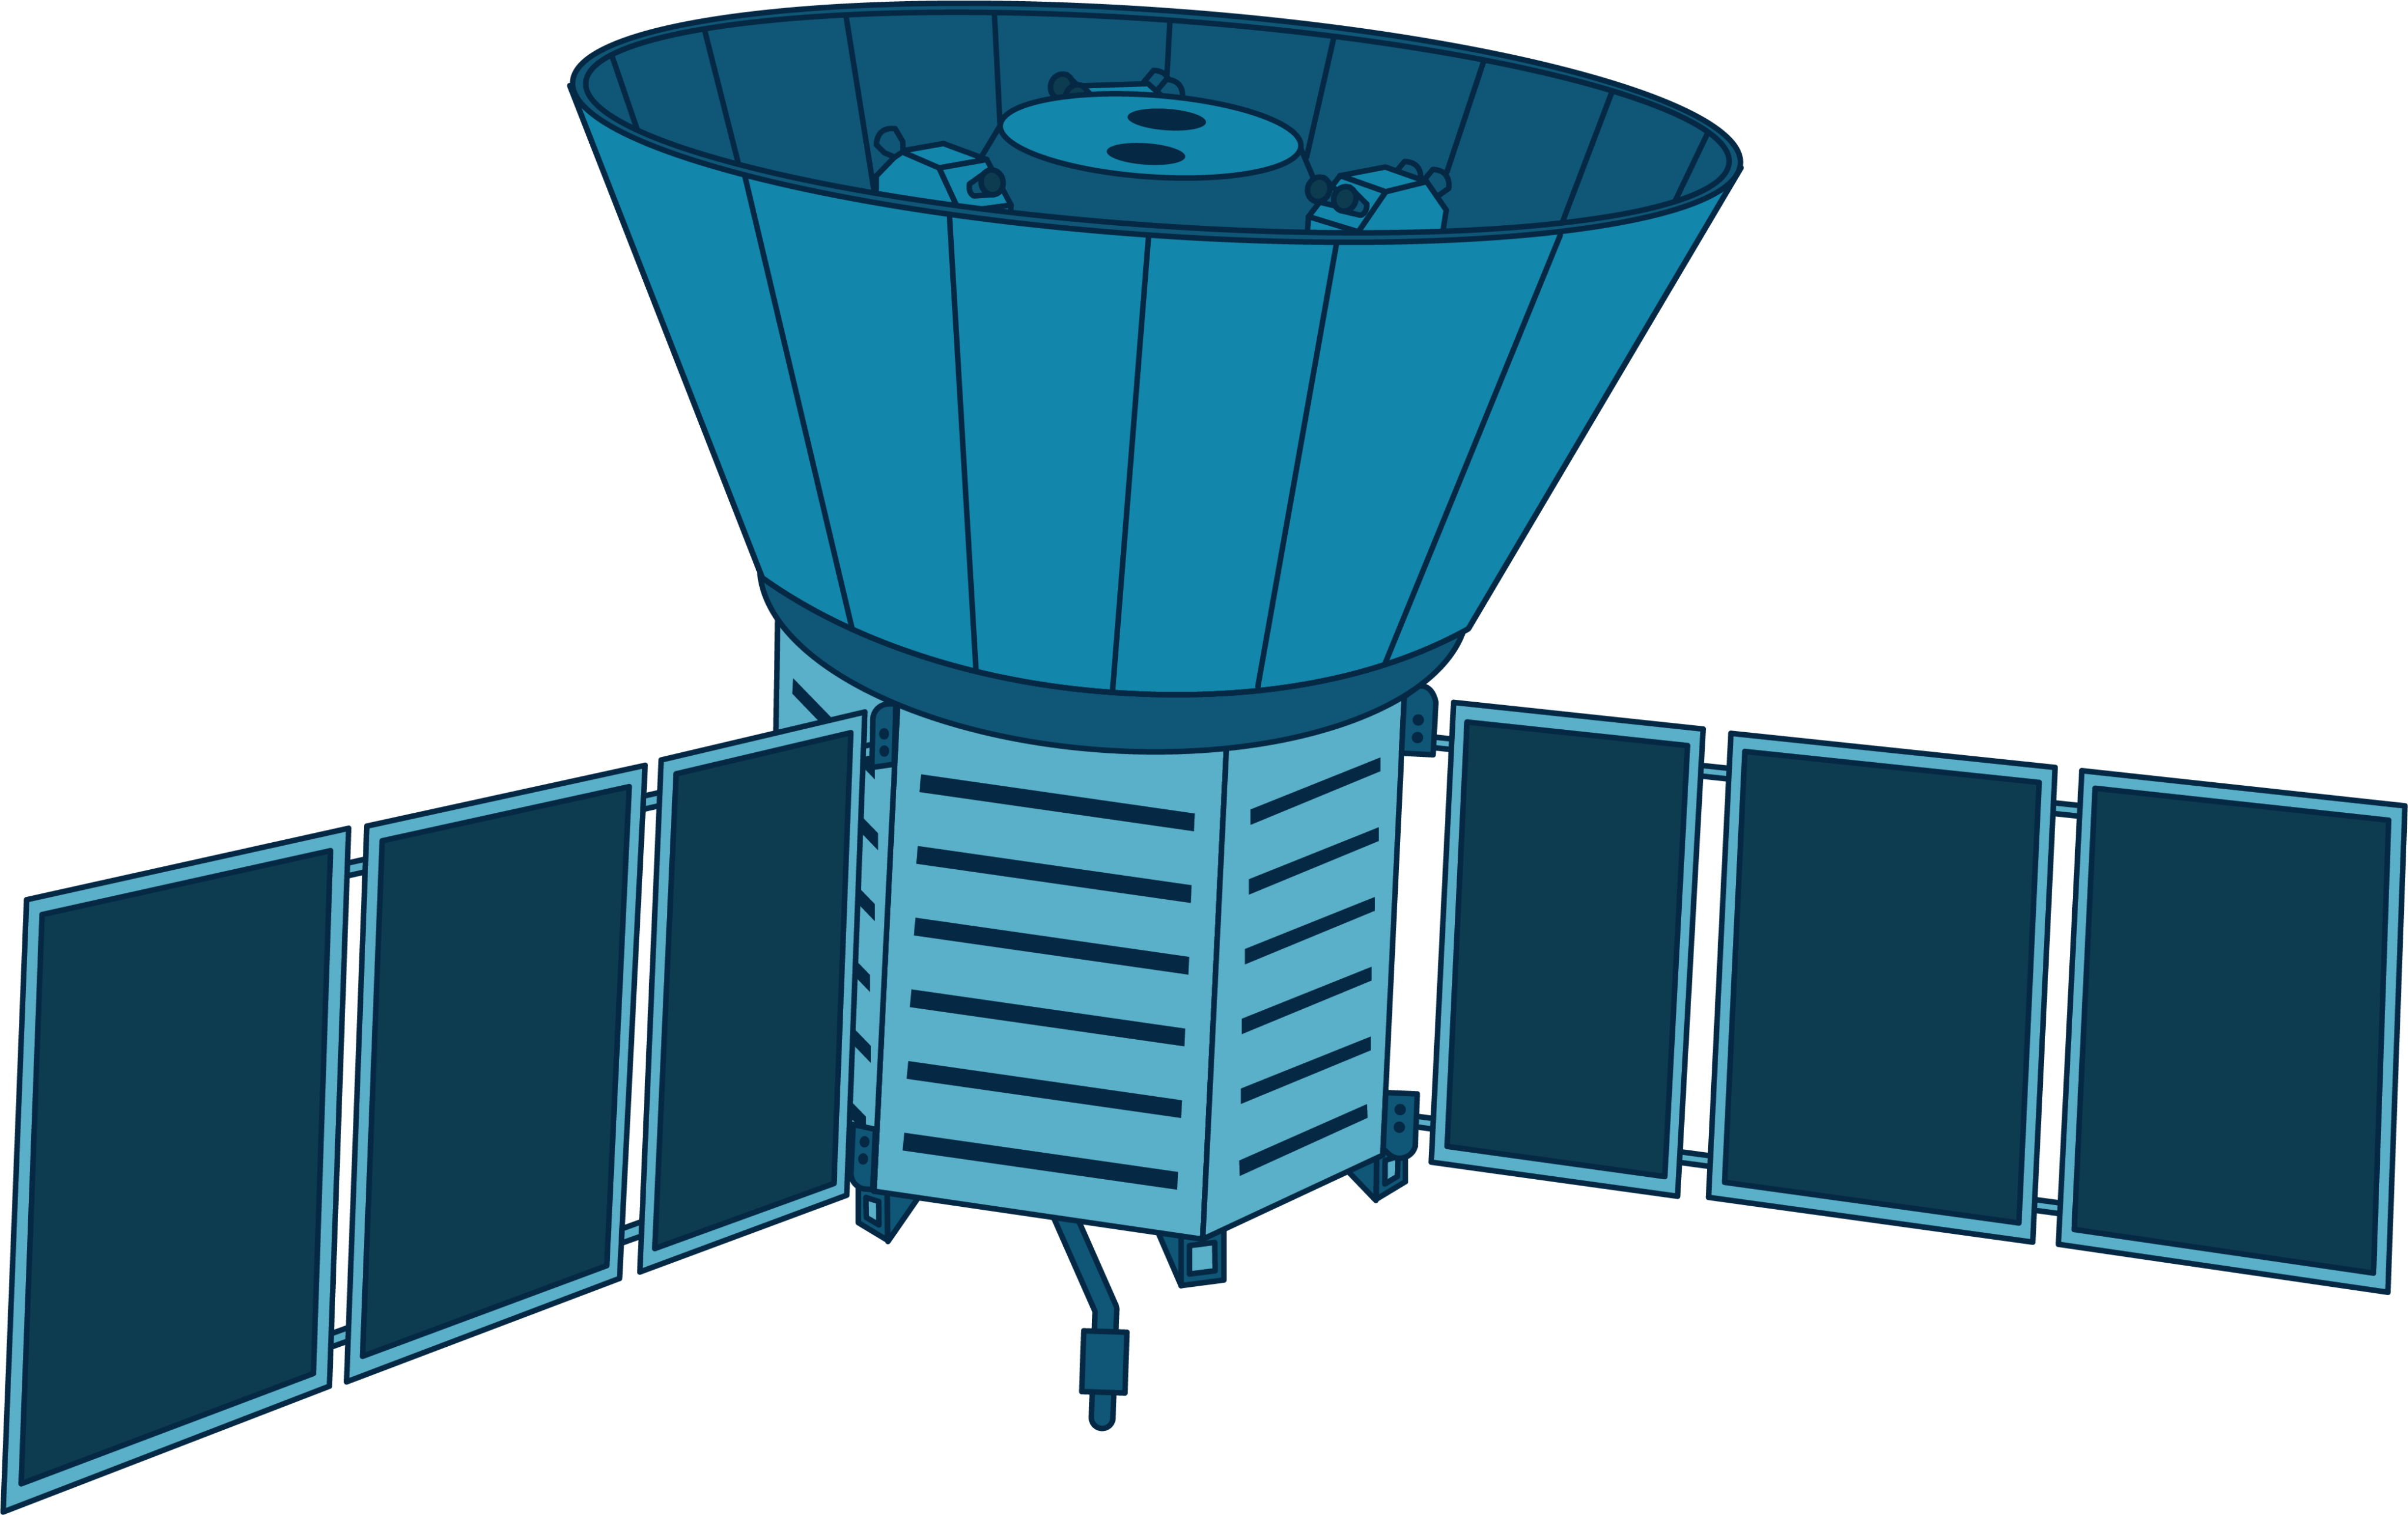 COBE is illustrated in light and dark blues. With two wings made up of three rectangular solar arrays each, the spacecraft's main body is made up of a striped, multi-sided cylinder with an attached cone-shaped structure on top.